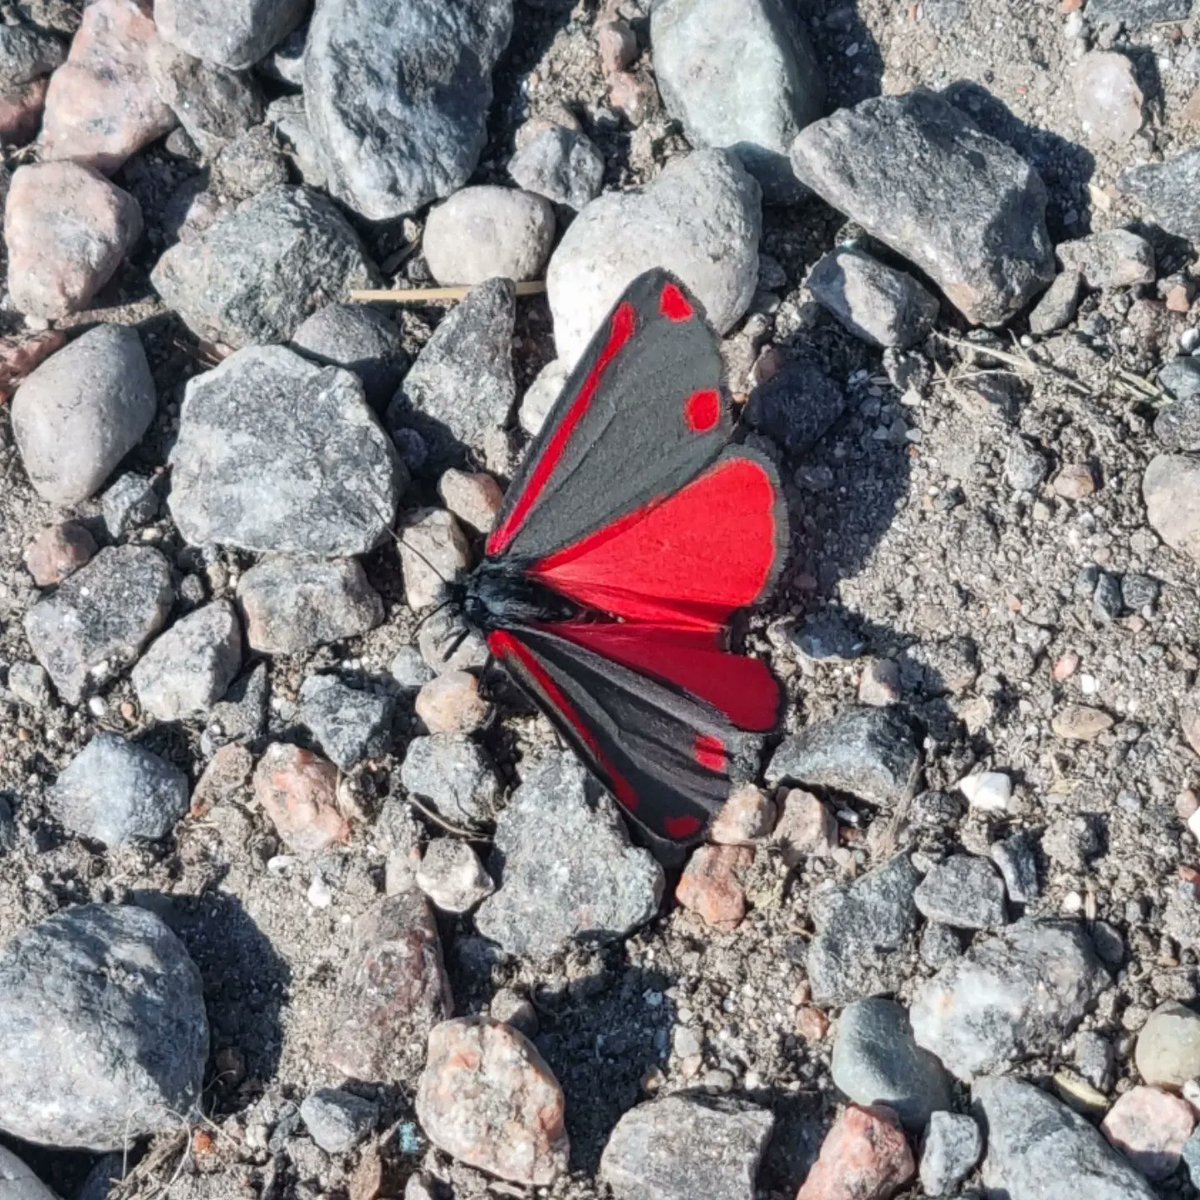 We get all the cool #moths at #IonaAbbey these days. This one is the #Cinnabar #Moth. 🦋

#Iona #IsleofIona #islandlife #butterfly #insect #entomology